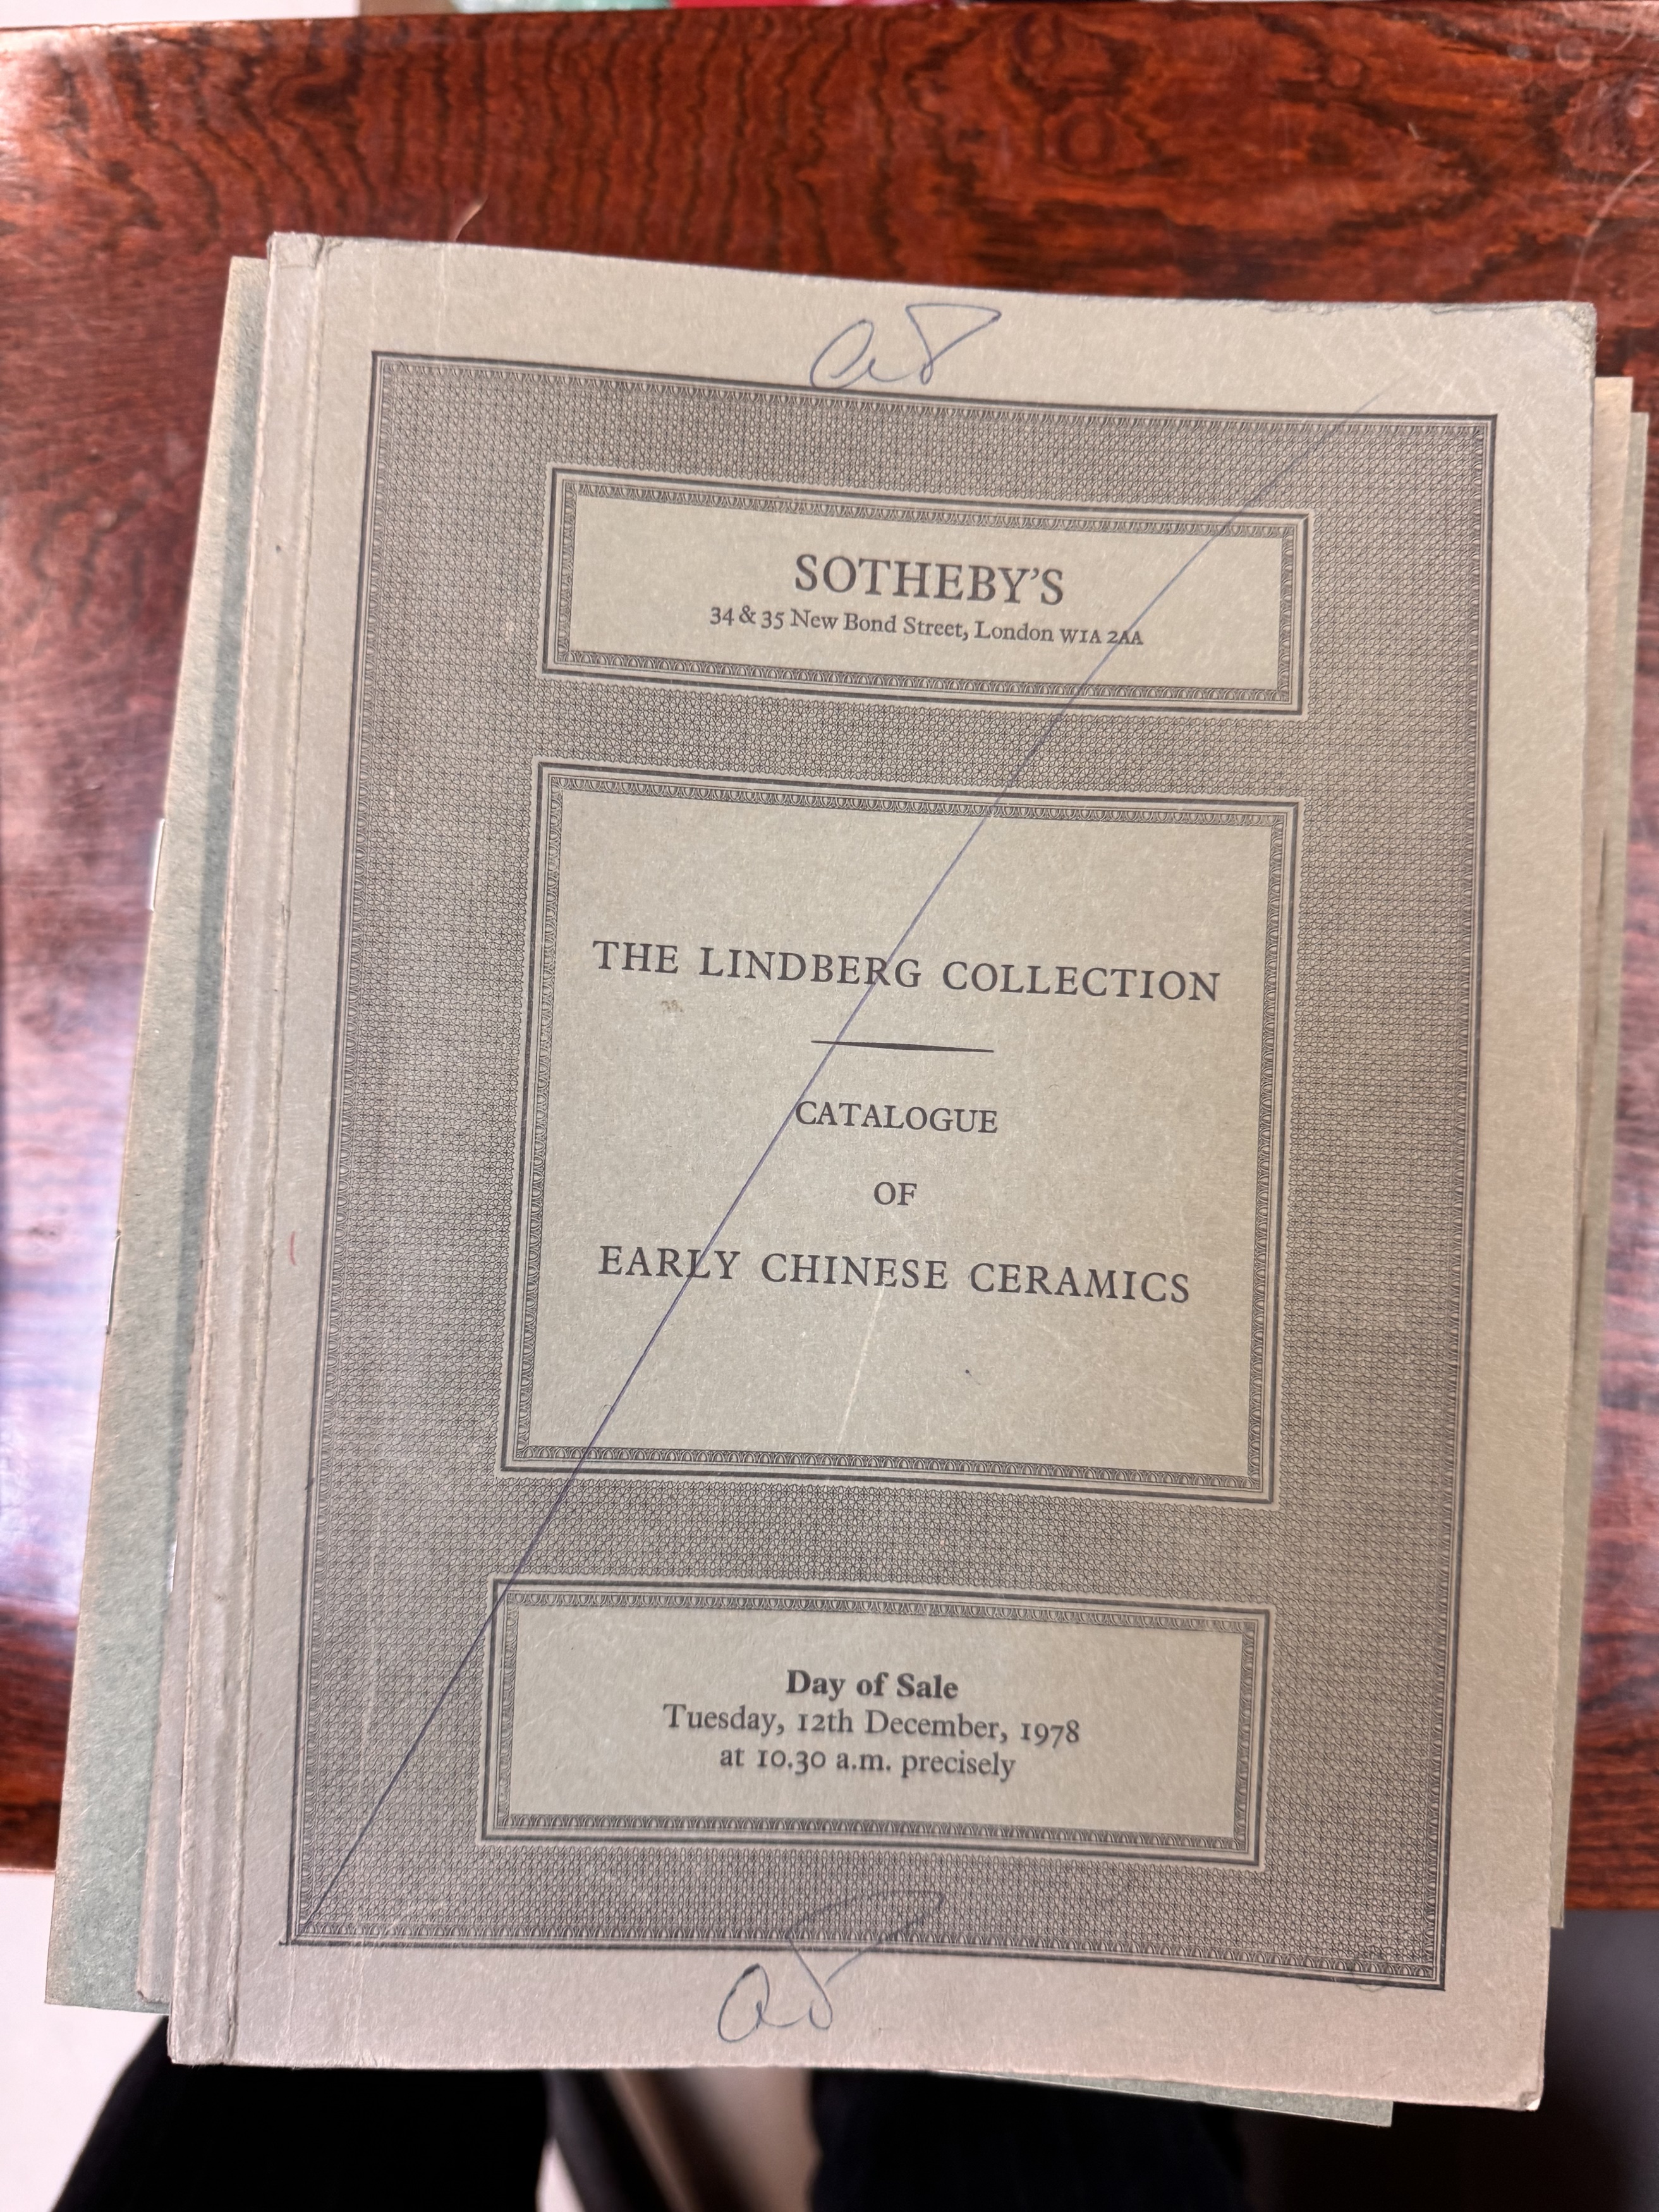 A LARGE COLLECTION OF EARLY SOTHEBY'S CHINESE ART CATALOGUES (50 VOLUMES) 早期蘇富比國藝術品硬面精裝拍賣圖錄一組 - Image 15 of 50